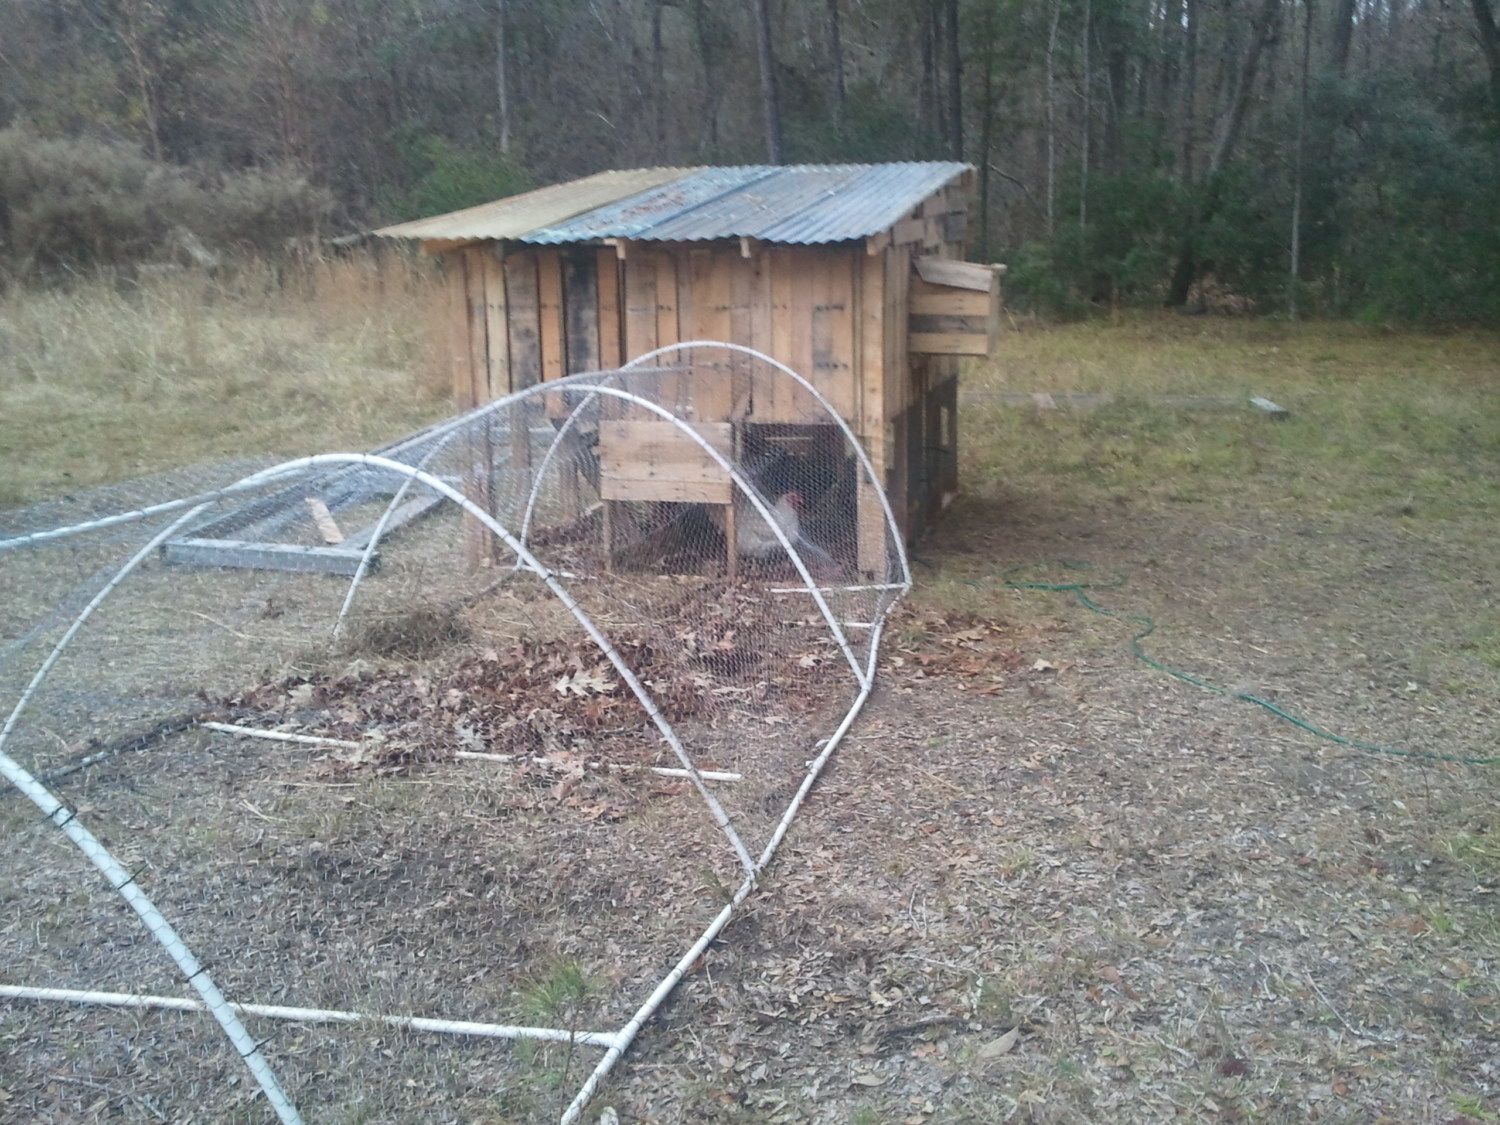 My new chicken coop made with pallets